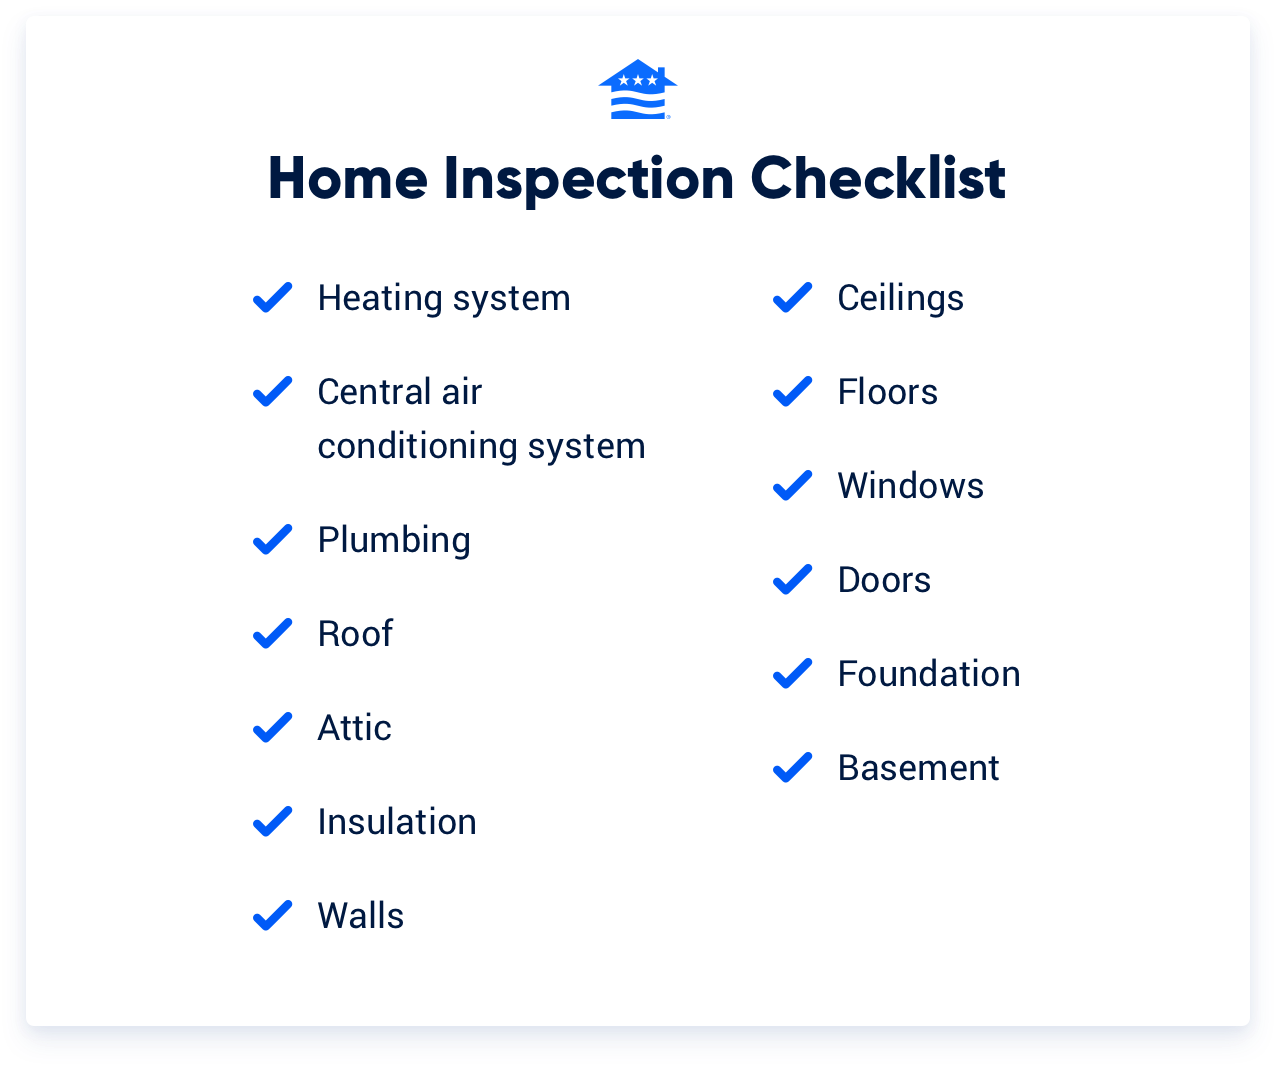 A checklist including the various things that are checked during a home inspection.